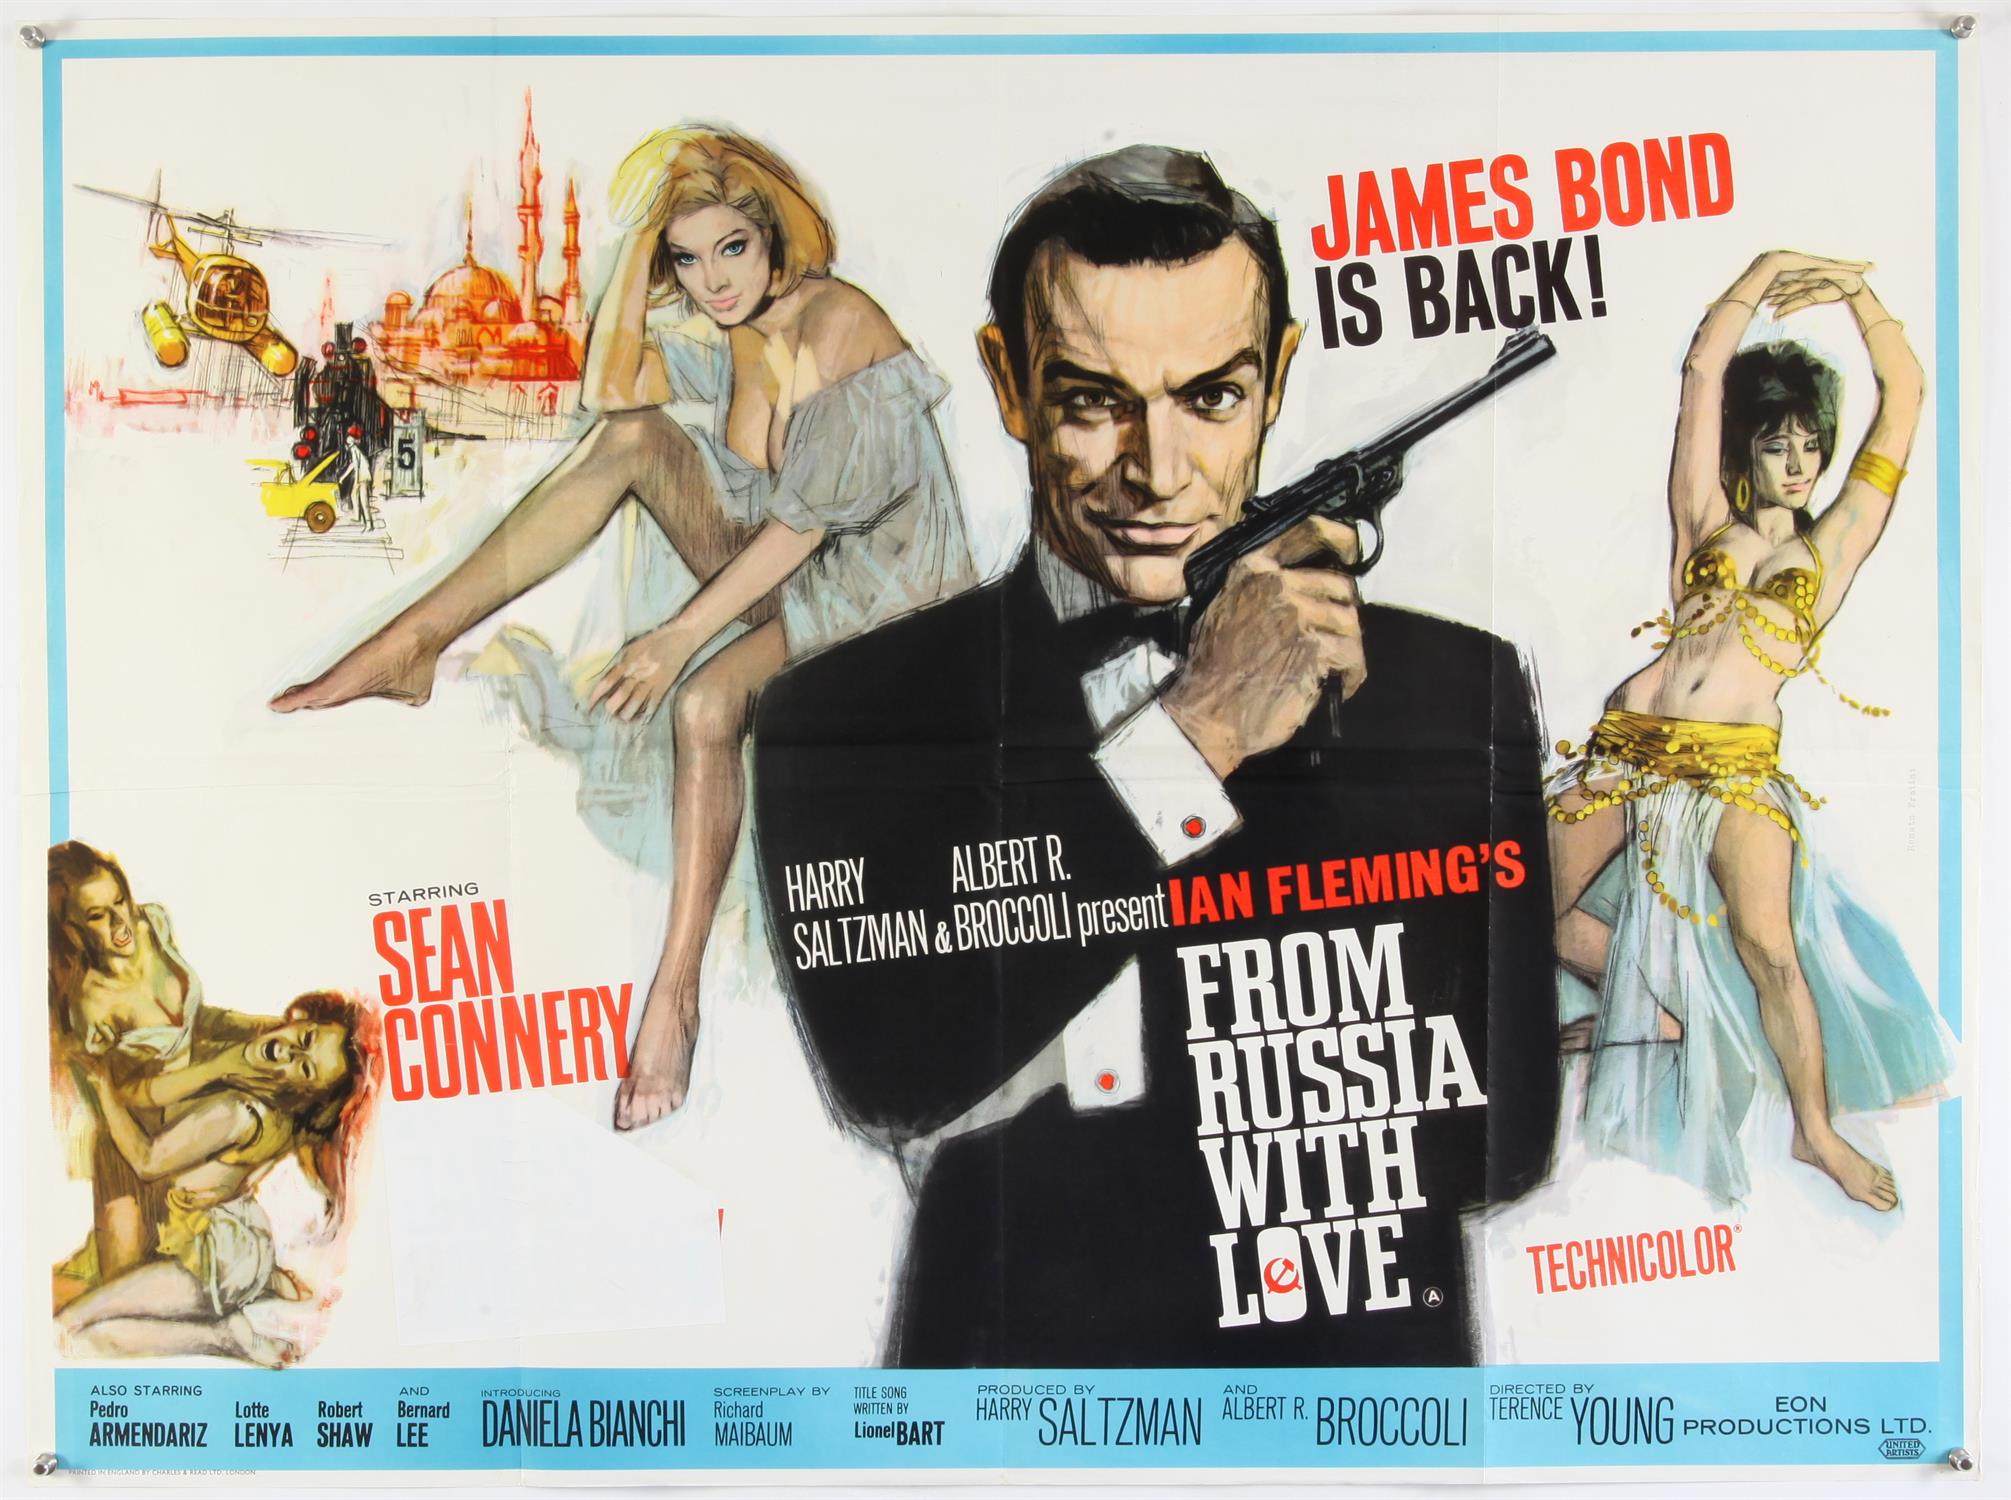 James Bond From Russia With Love (1963) British Quad film poster, Art by Renato Fratini, - Image 3 of 4